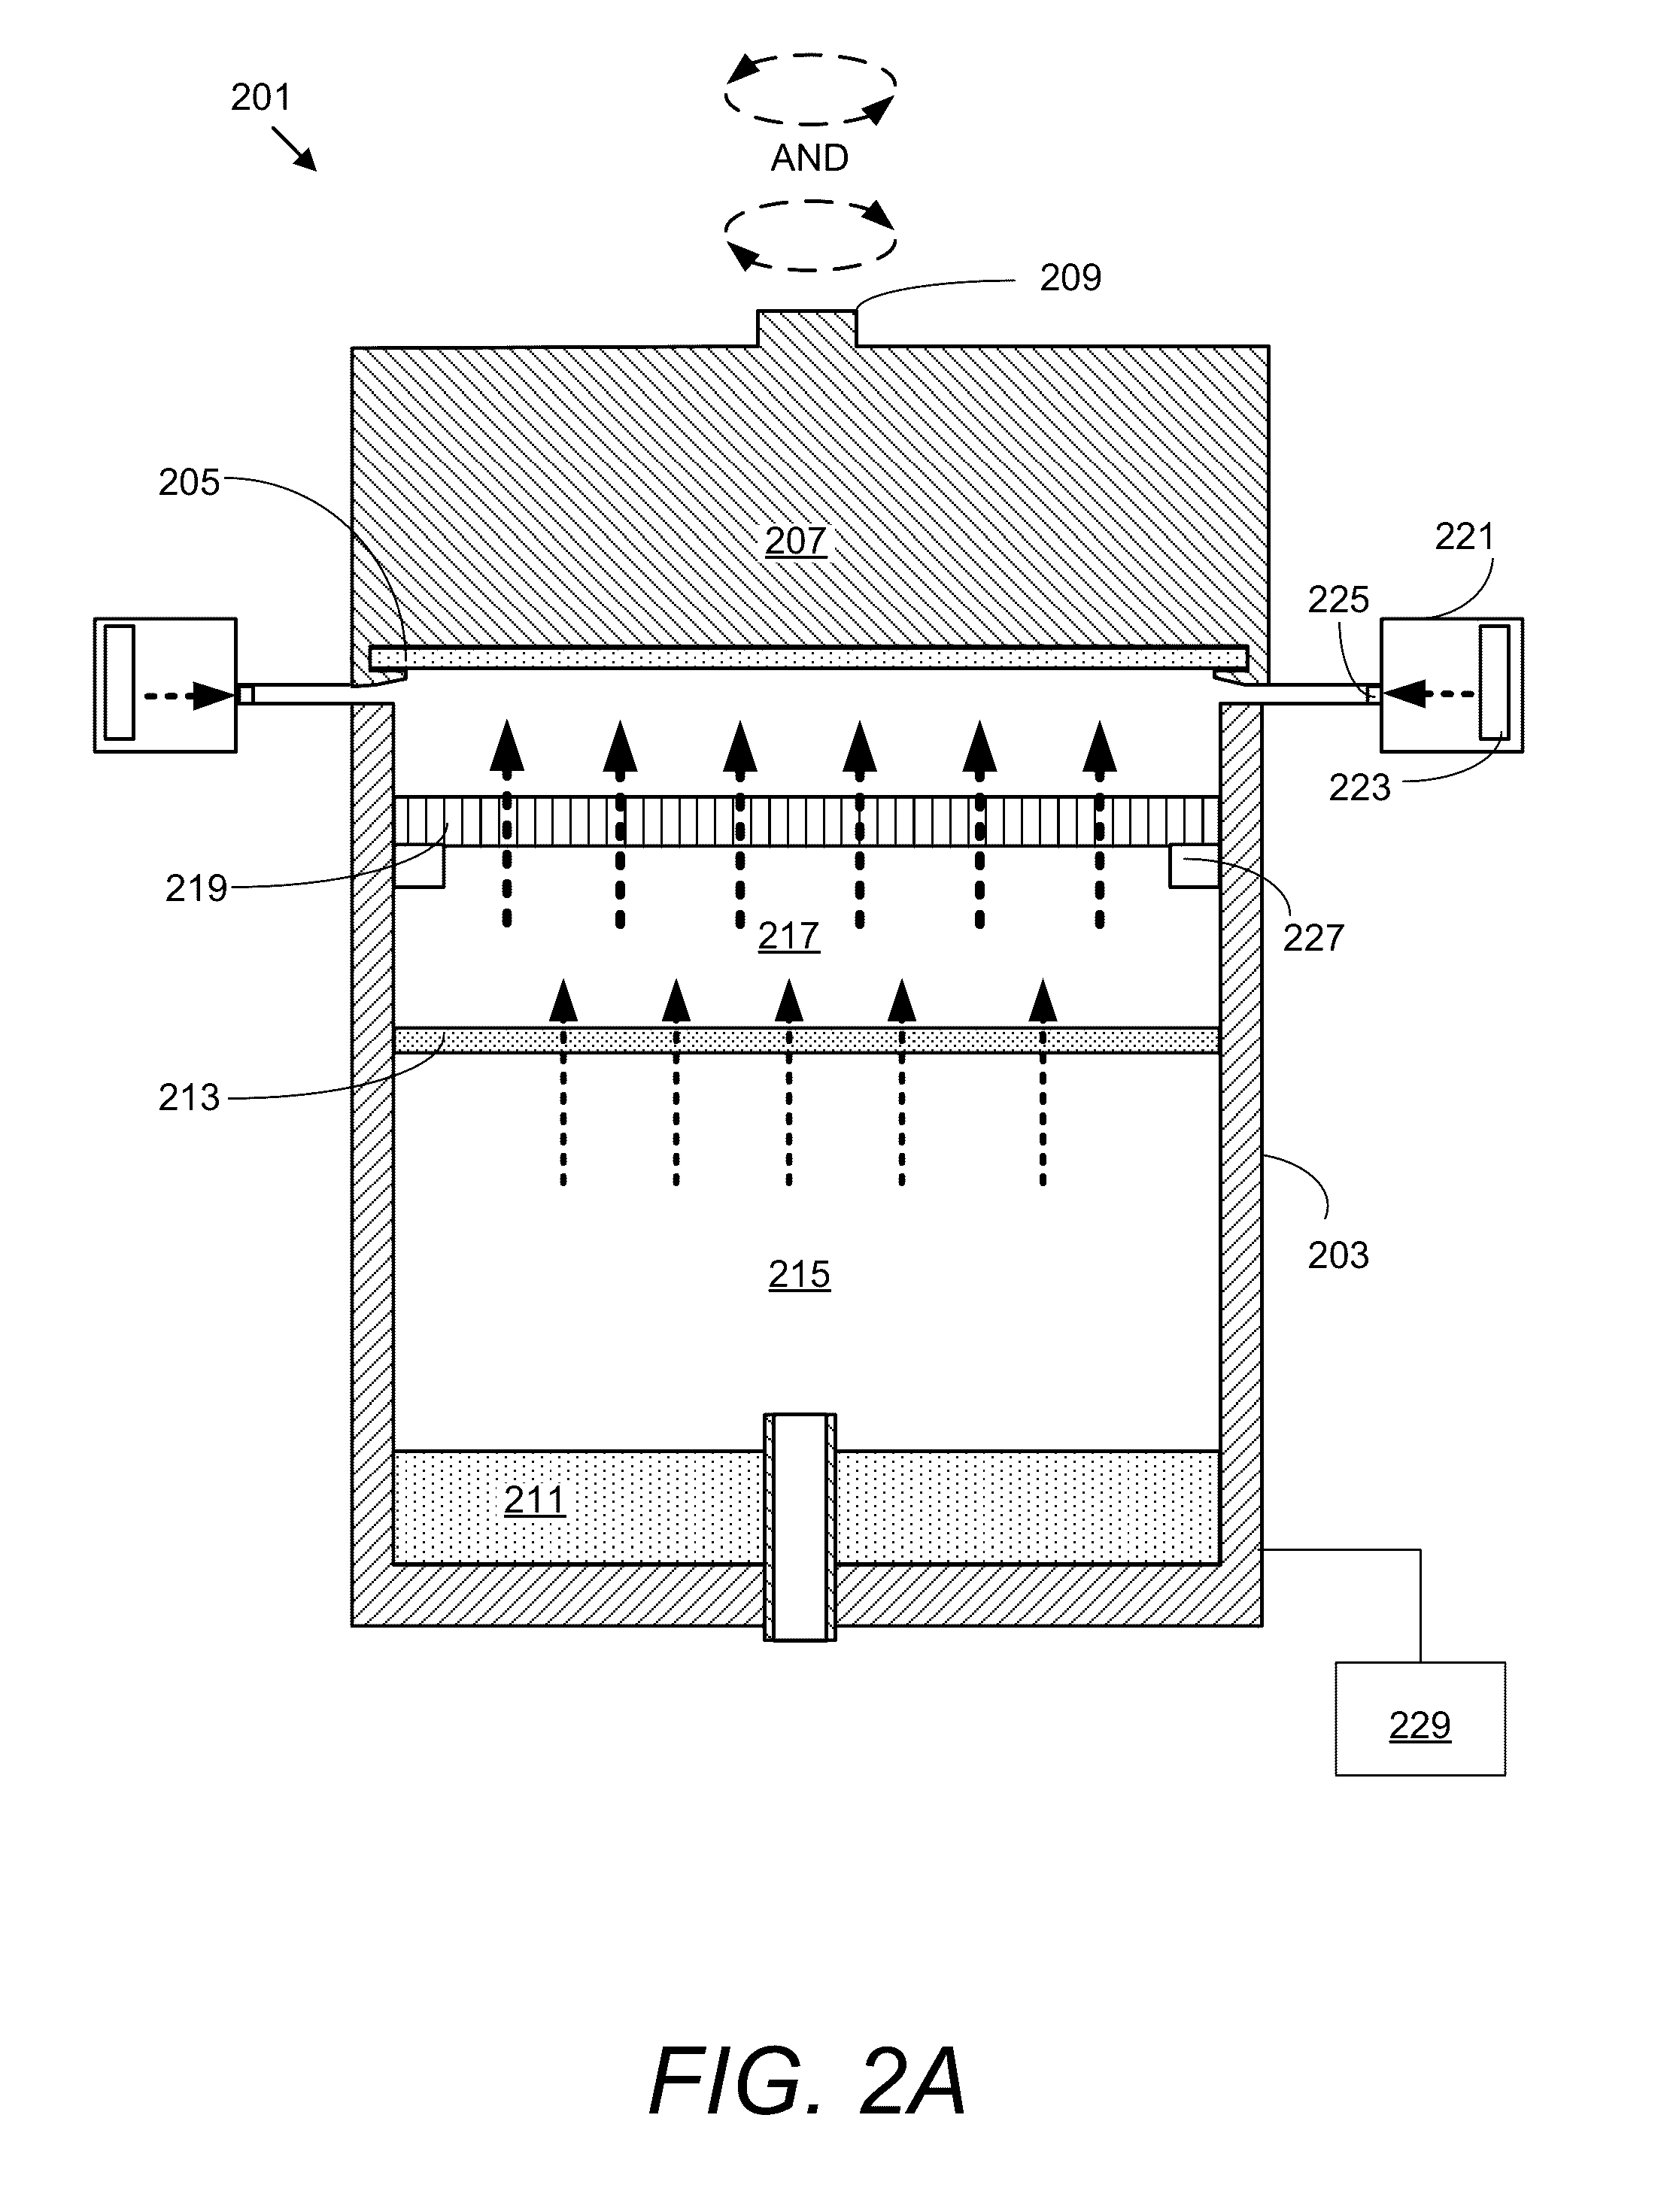 Apparatus and method for dynamic control of plated uniformity with the use of remote electric current